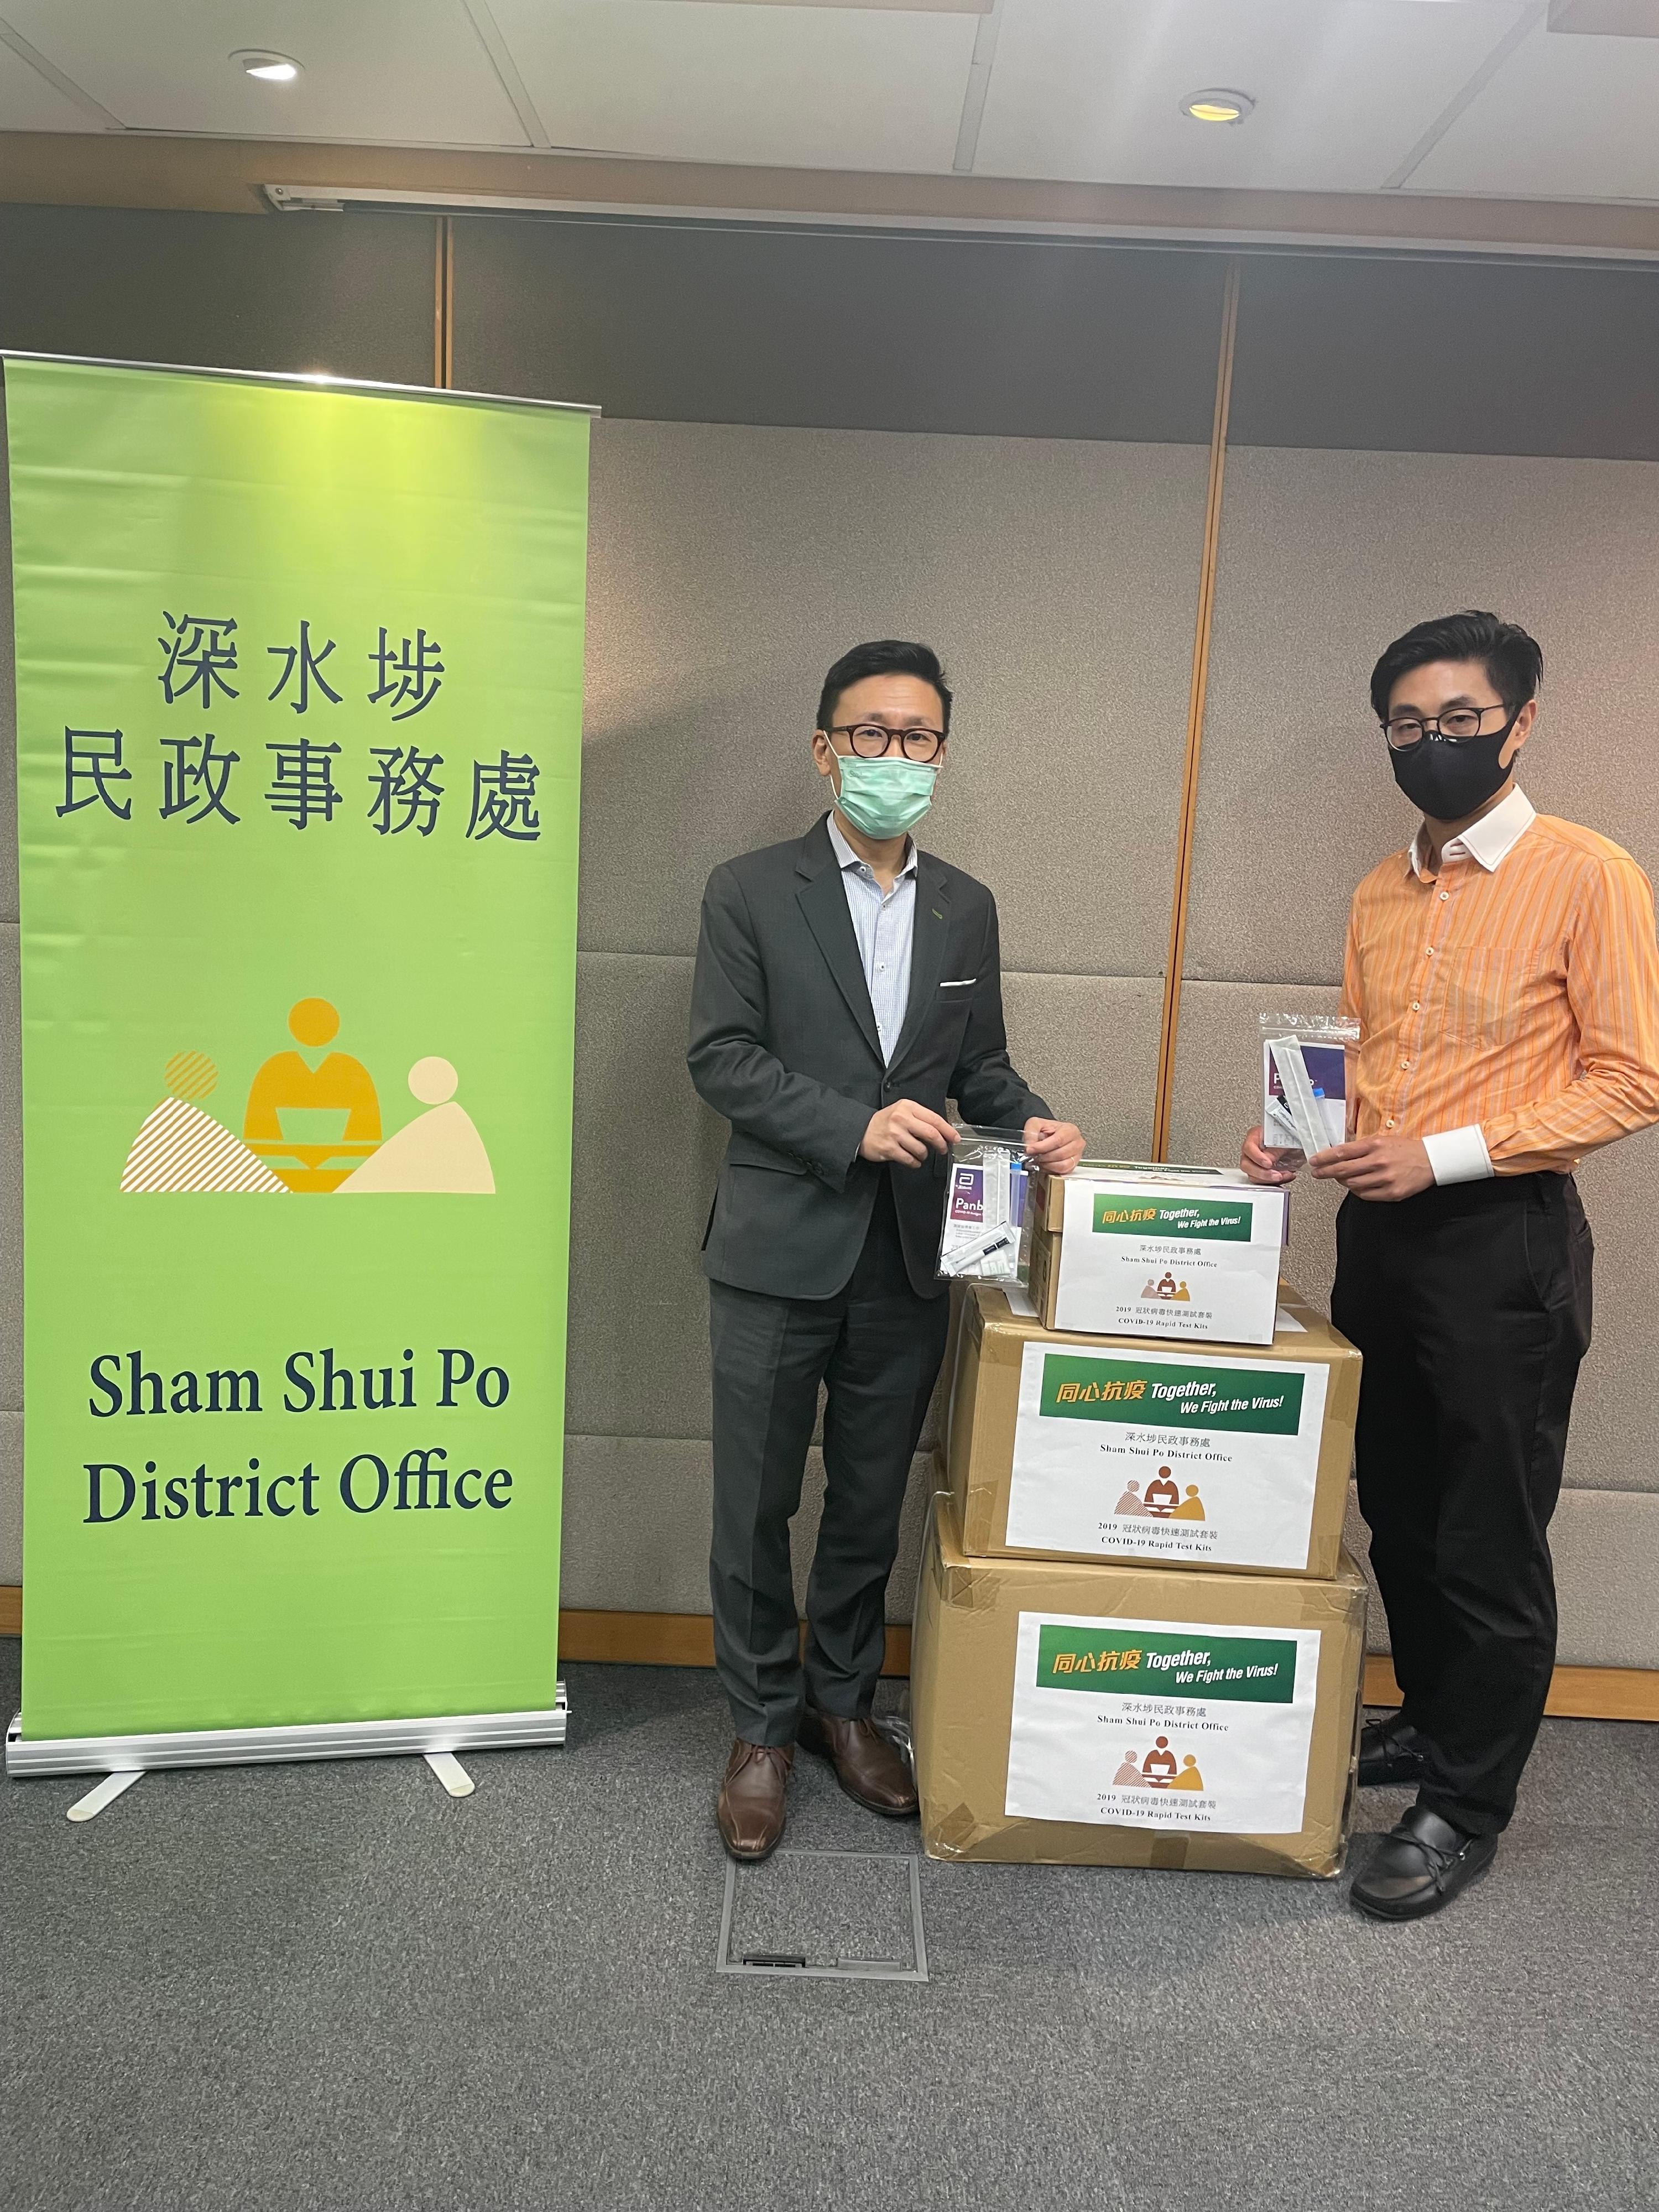 The Sham Shui Po District Office today (June 1) distributed COVID-19 rapid test kits to households, cleansing workers and property management staff living and working in residential premises around 70A-178 Tai Po Road for voluntary testing through the property management companies.